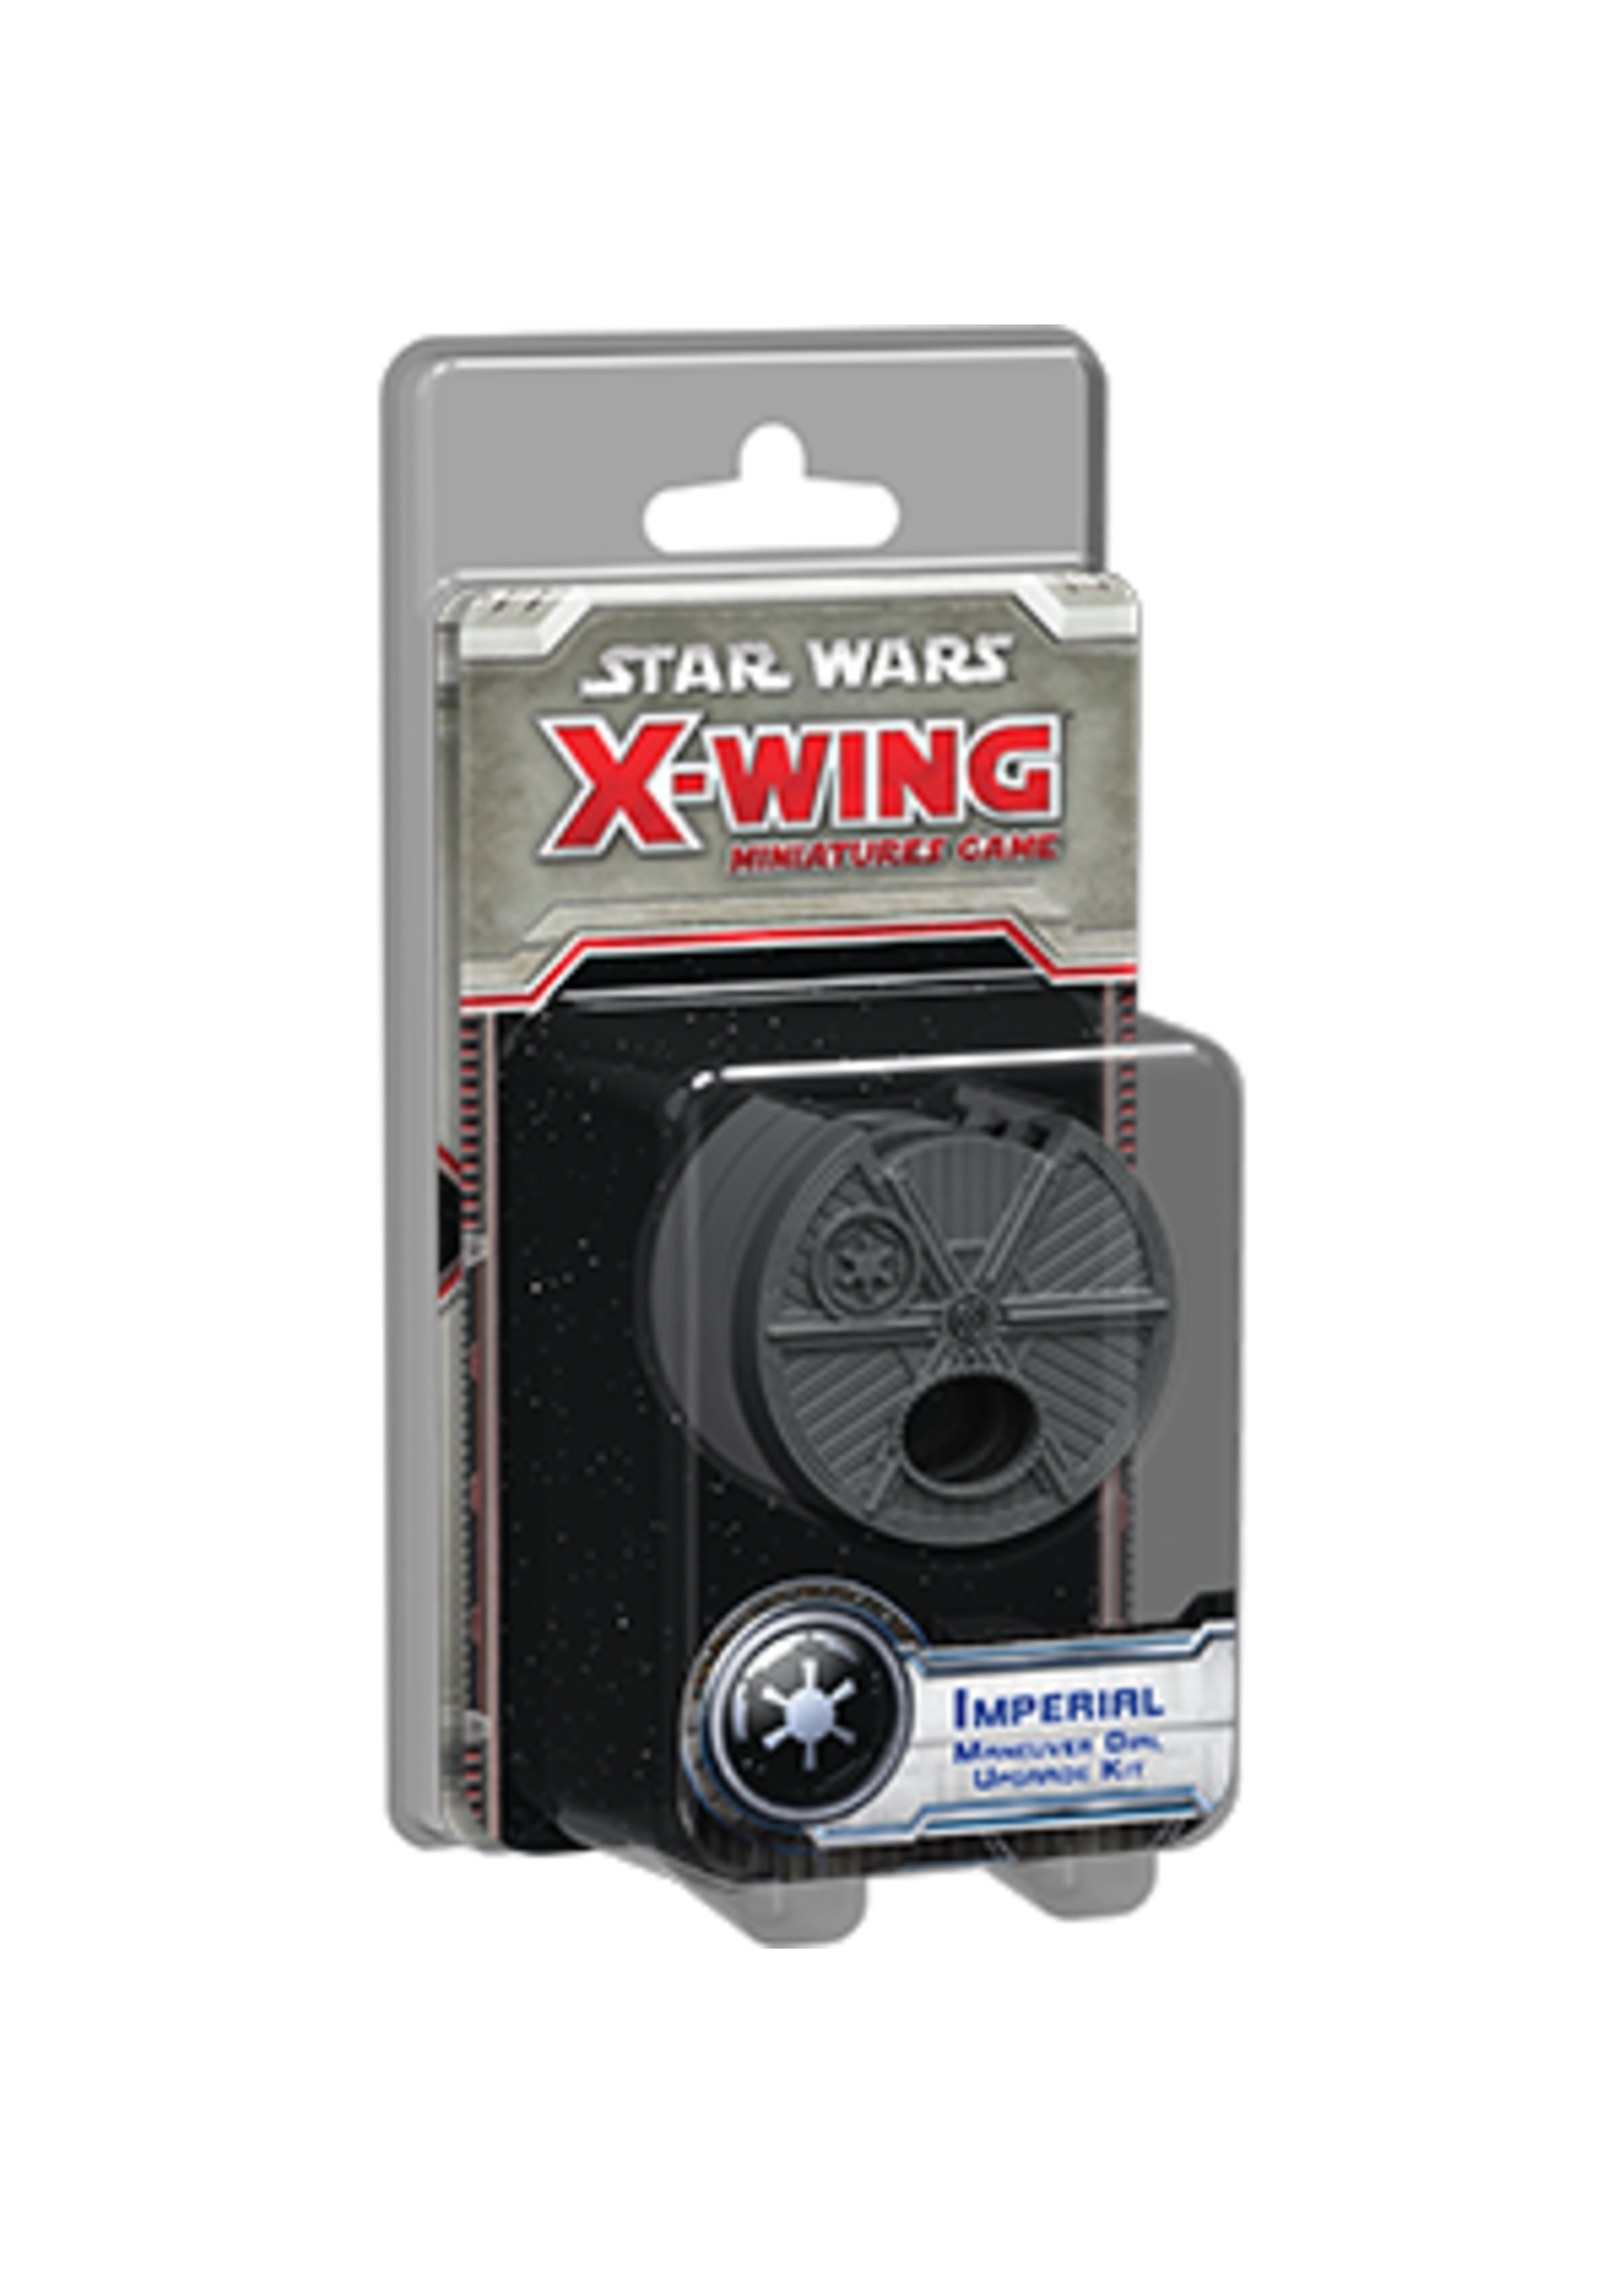 Star Wars X-Wing Miniatures Game: Imperial Maneuver Dial Upgrade Kit